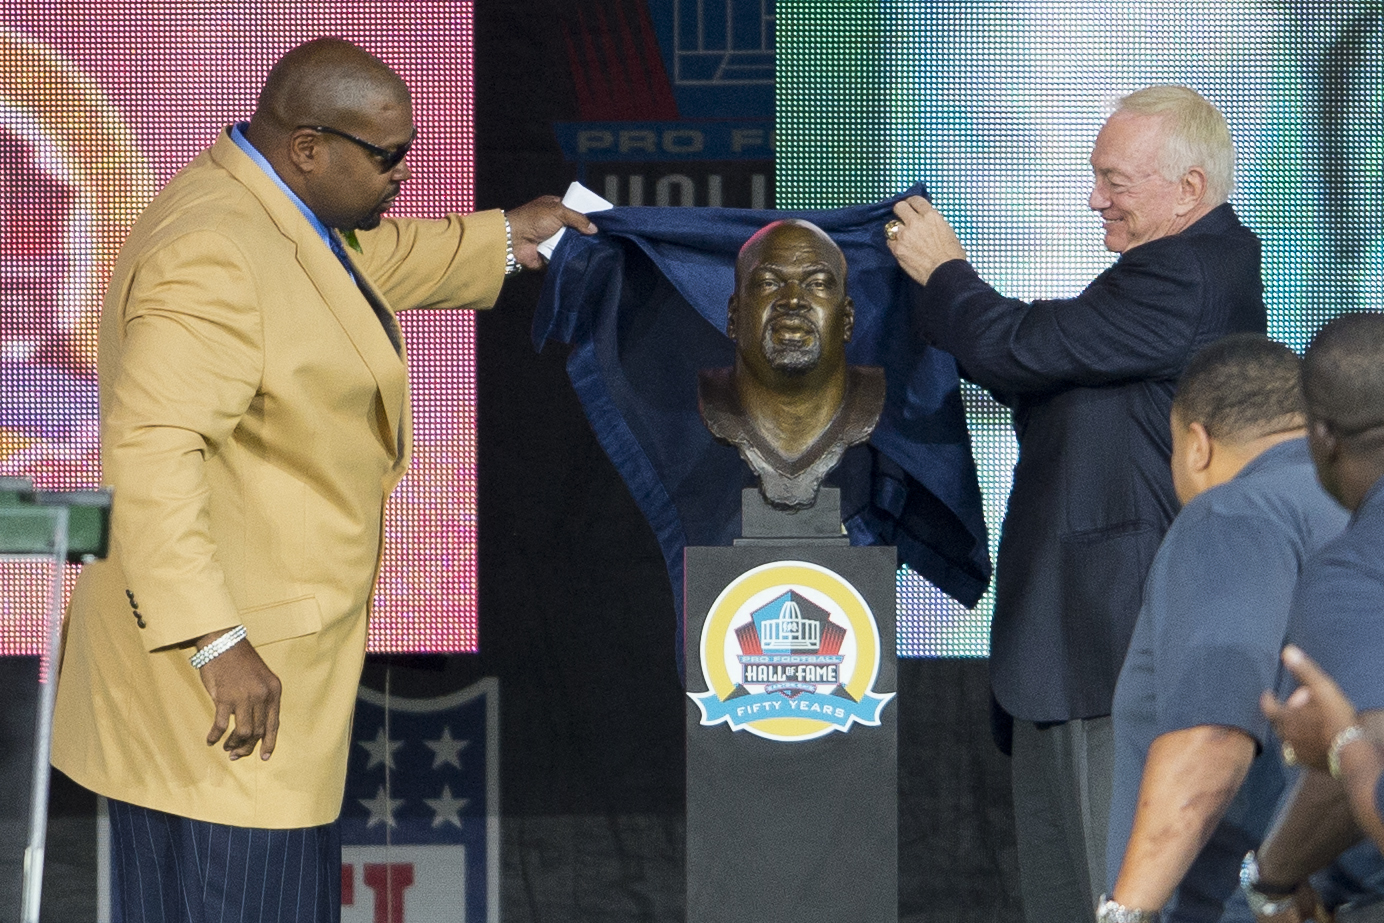 CANTON, OH - AUGUST 3: Dallas Cowboys Owner, President and General Manager, Jerry Jones (R) presents former offensive Lineman Larry Allen of the Dallas Cowboys his Hall of Fame bust during the NFL Class of 2013 Enshrinement Ceremony at Fawcett Stadium on Aug. 3, 2013 in Canton, Ohio.,Image: 167740817, License: Rights-managed, Restrictions: , Model Release: no